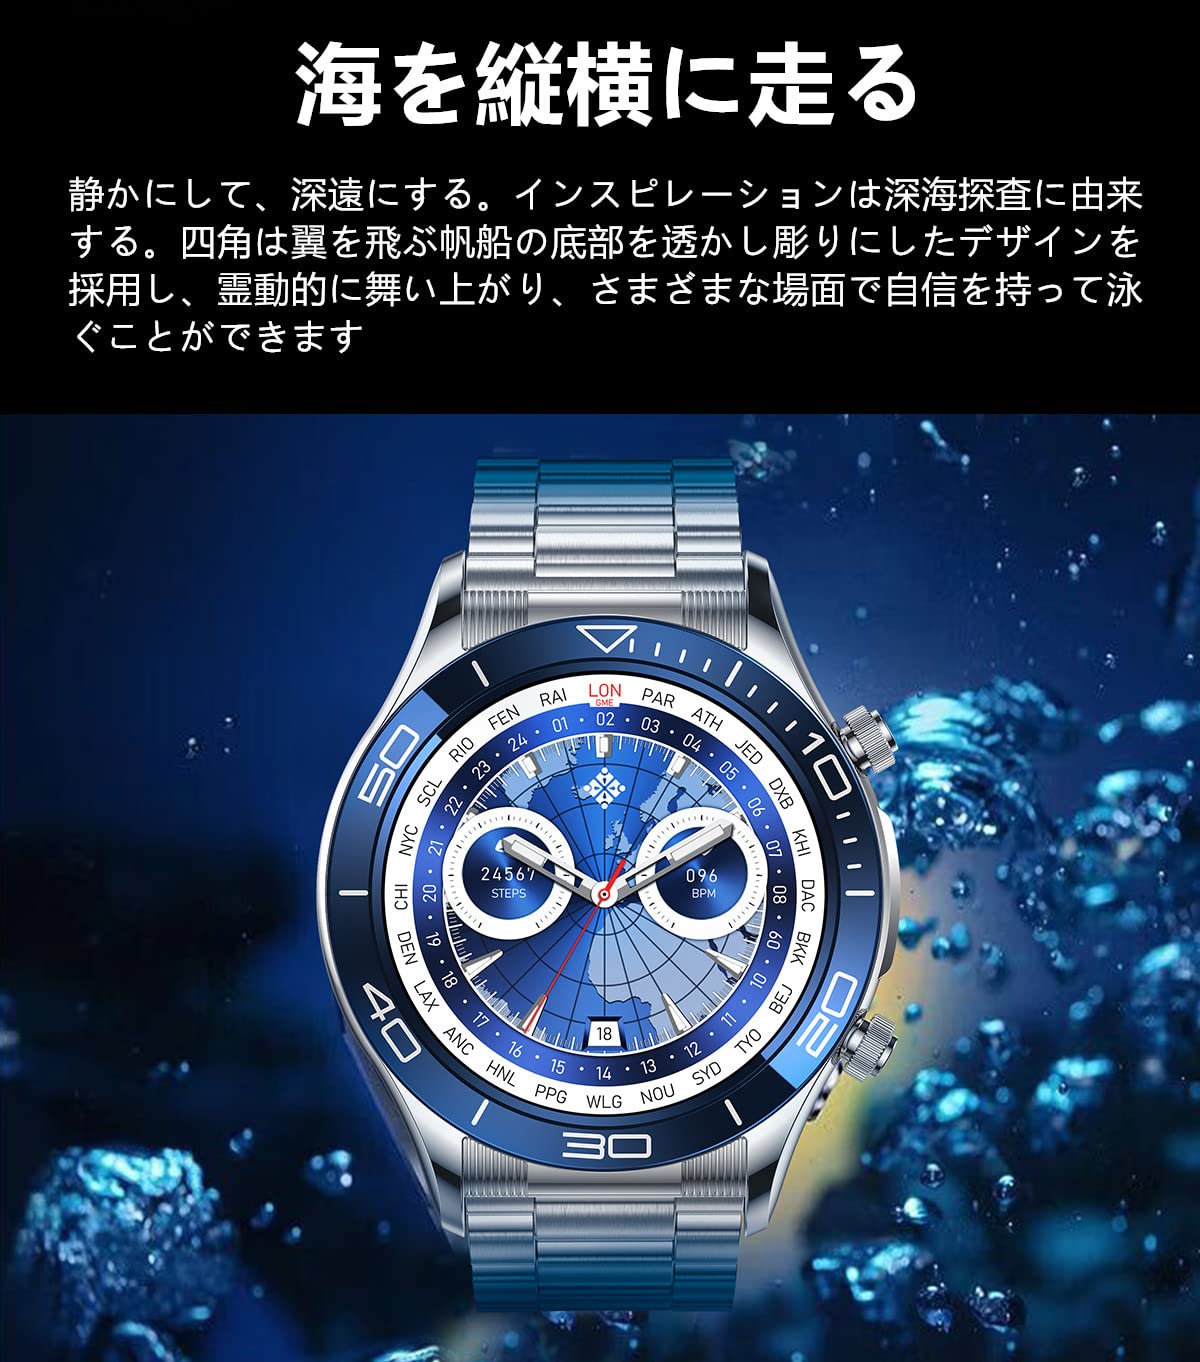 JUSUTEK 2023 Popular Luxury Smart Watch with Calling Function, High-End Sports All-Metal Watch, Pedometer, IP68 Waterproof, SOS Emergency Contact, Calculator, Smart Watch, Belt Replacement, Music Control, Smart Bracelet, Weather Forecast, 100+ Exercise Mo